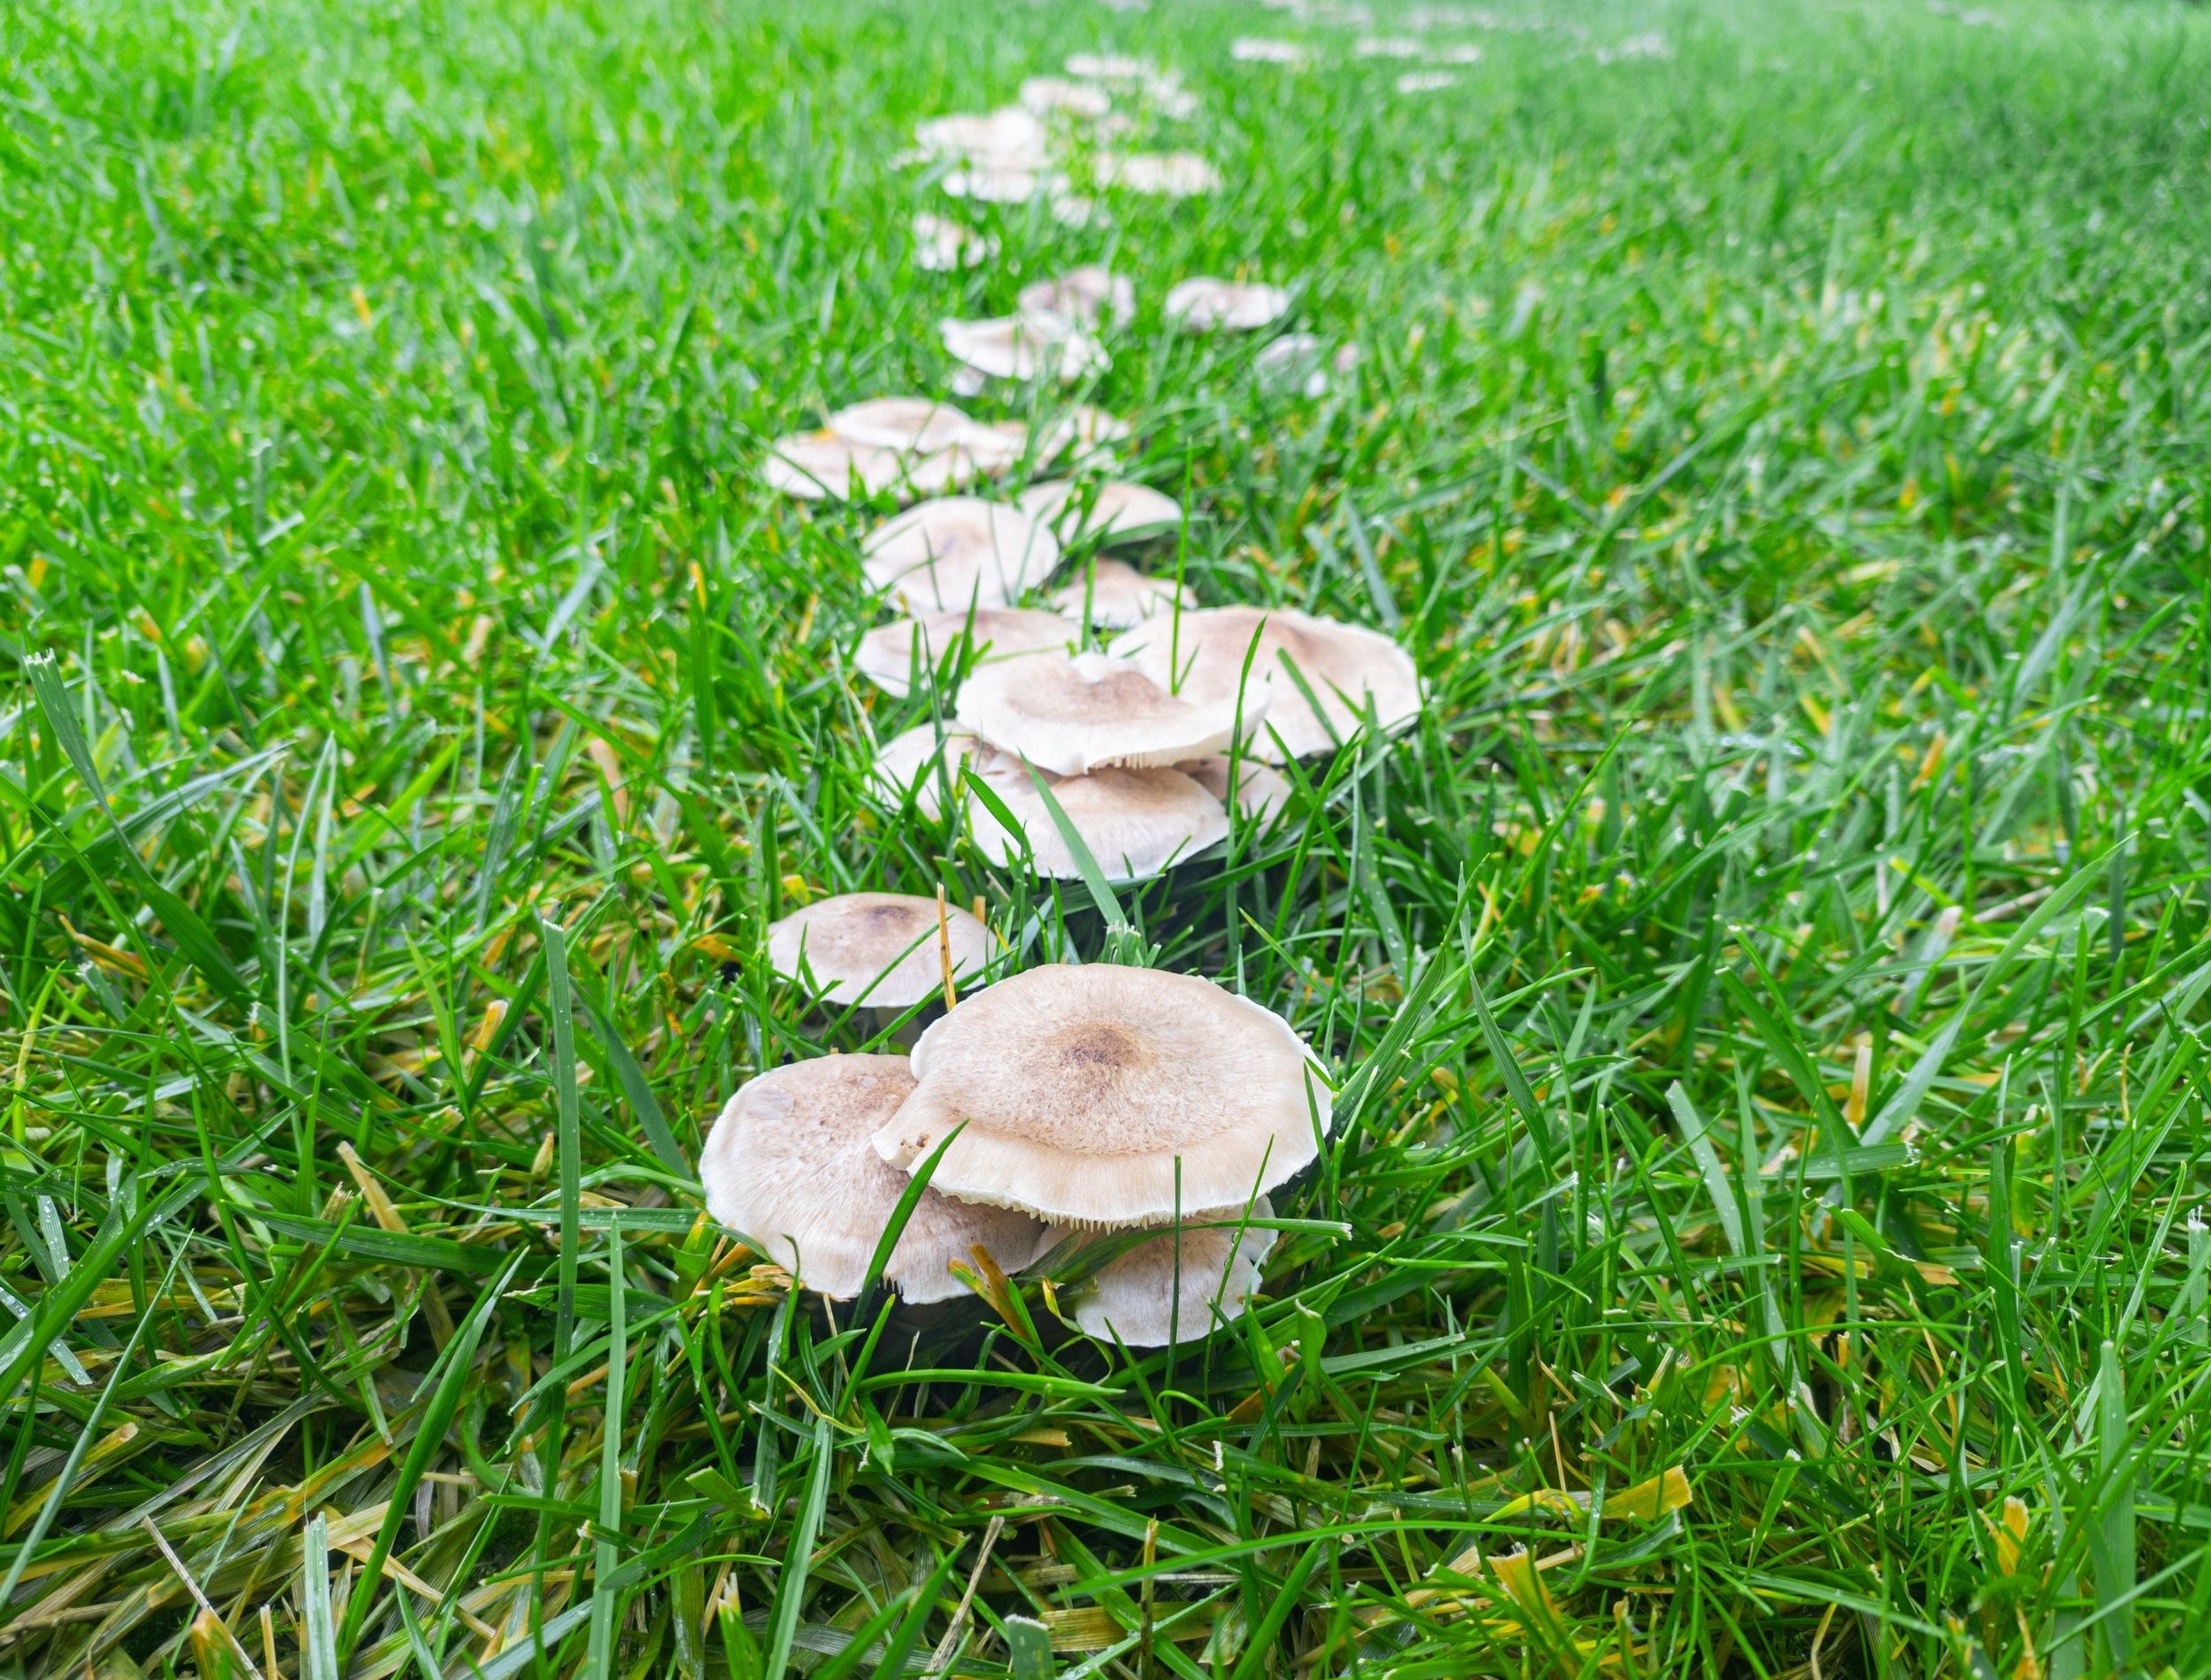 mushrooms growing on the lawn